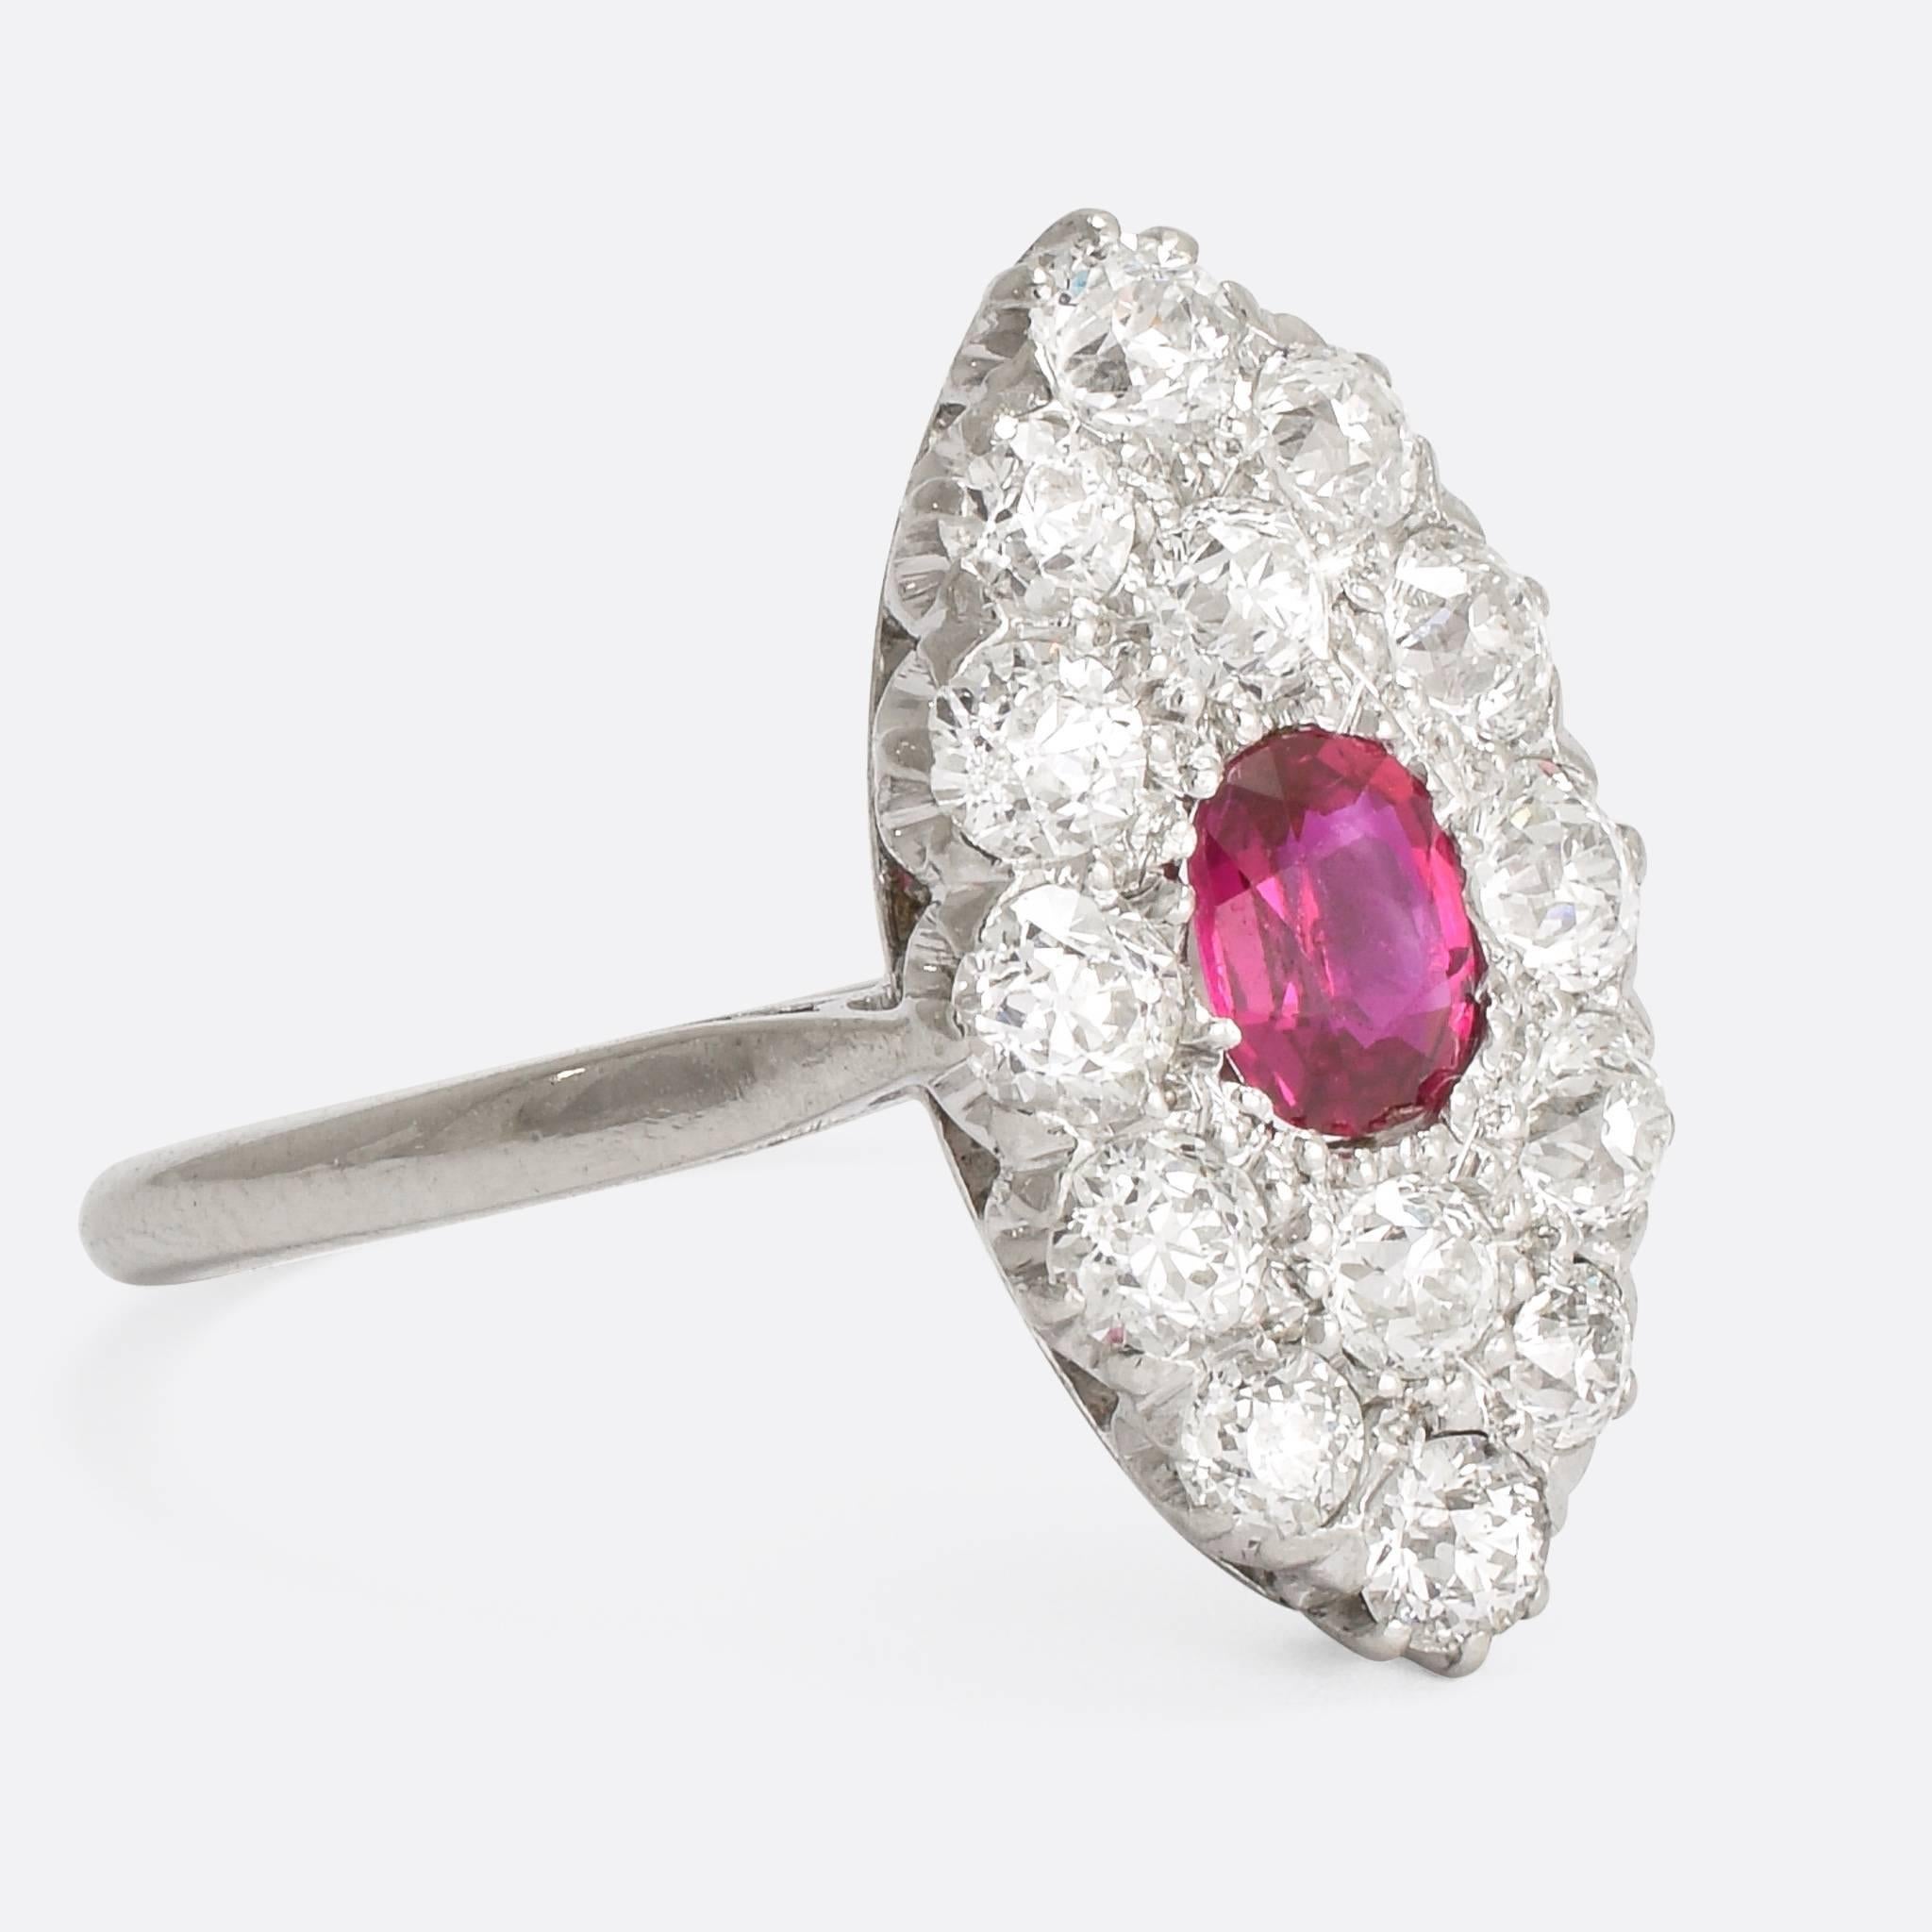 A superb Edwardian marquise cluster ring, set with a vibrant central ruby and a 1.6ct cluster of old cut diamonds. Modelled in platinum throughout, the ring dates to c.1910 - with an exceptionally bright cluster of diamonds in elegant claw settings.